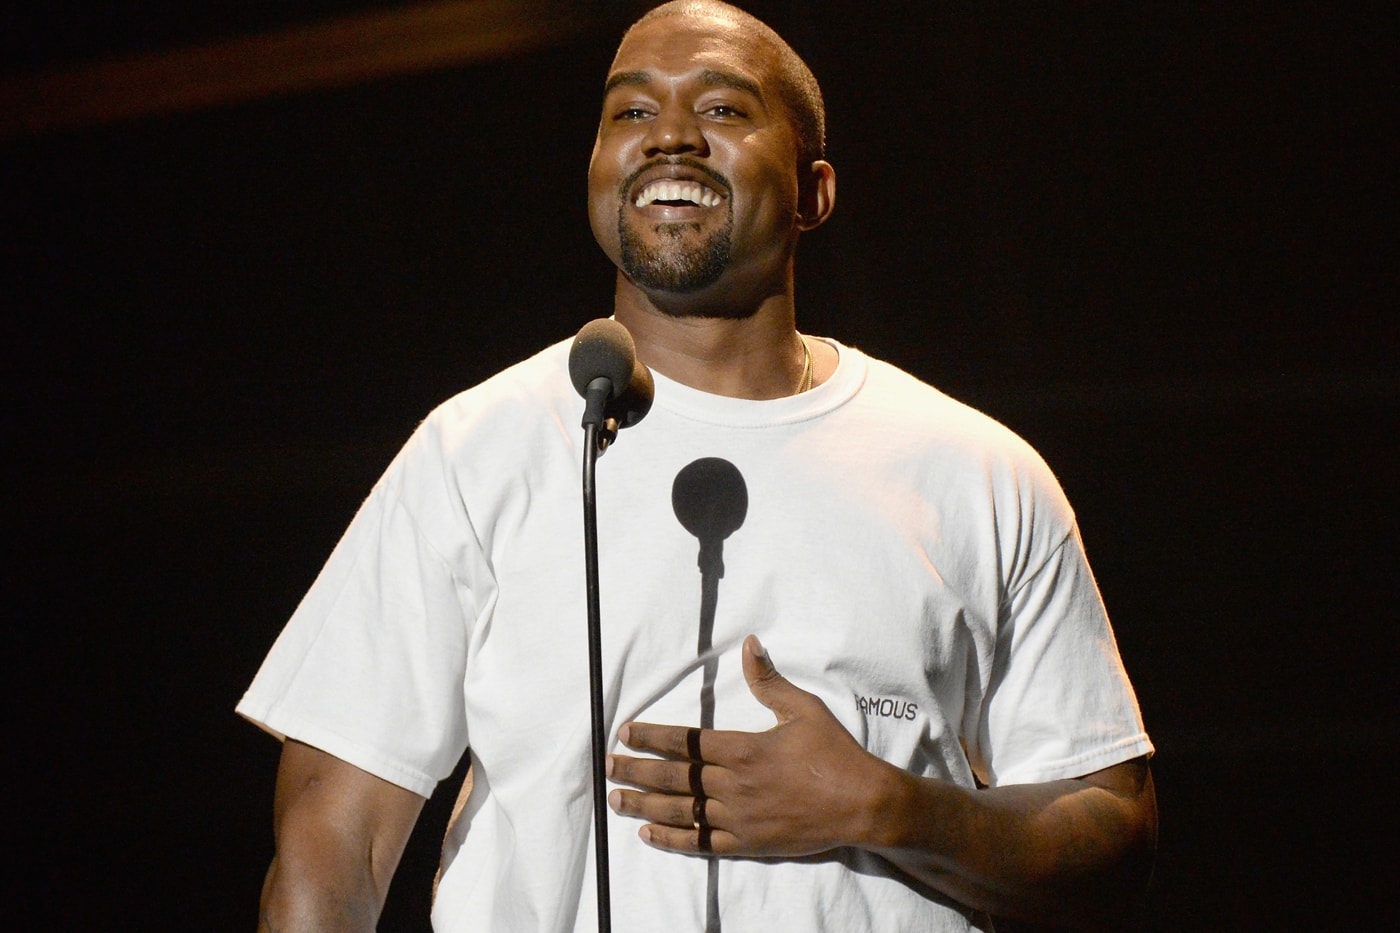 kanye-west-and-adidas-to-launch-new-brand-and-retailers